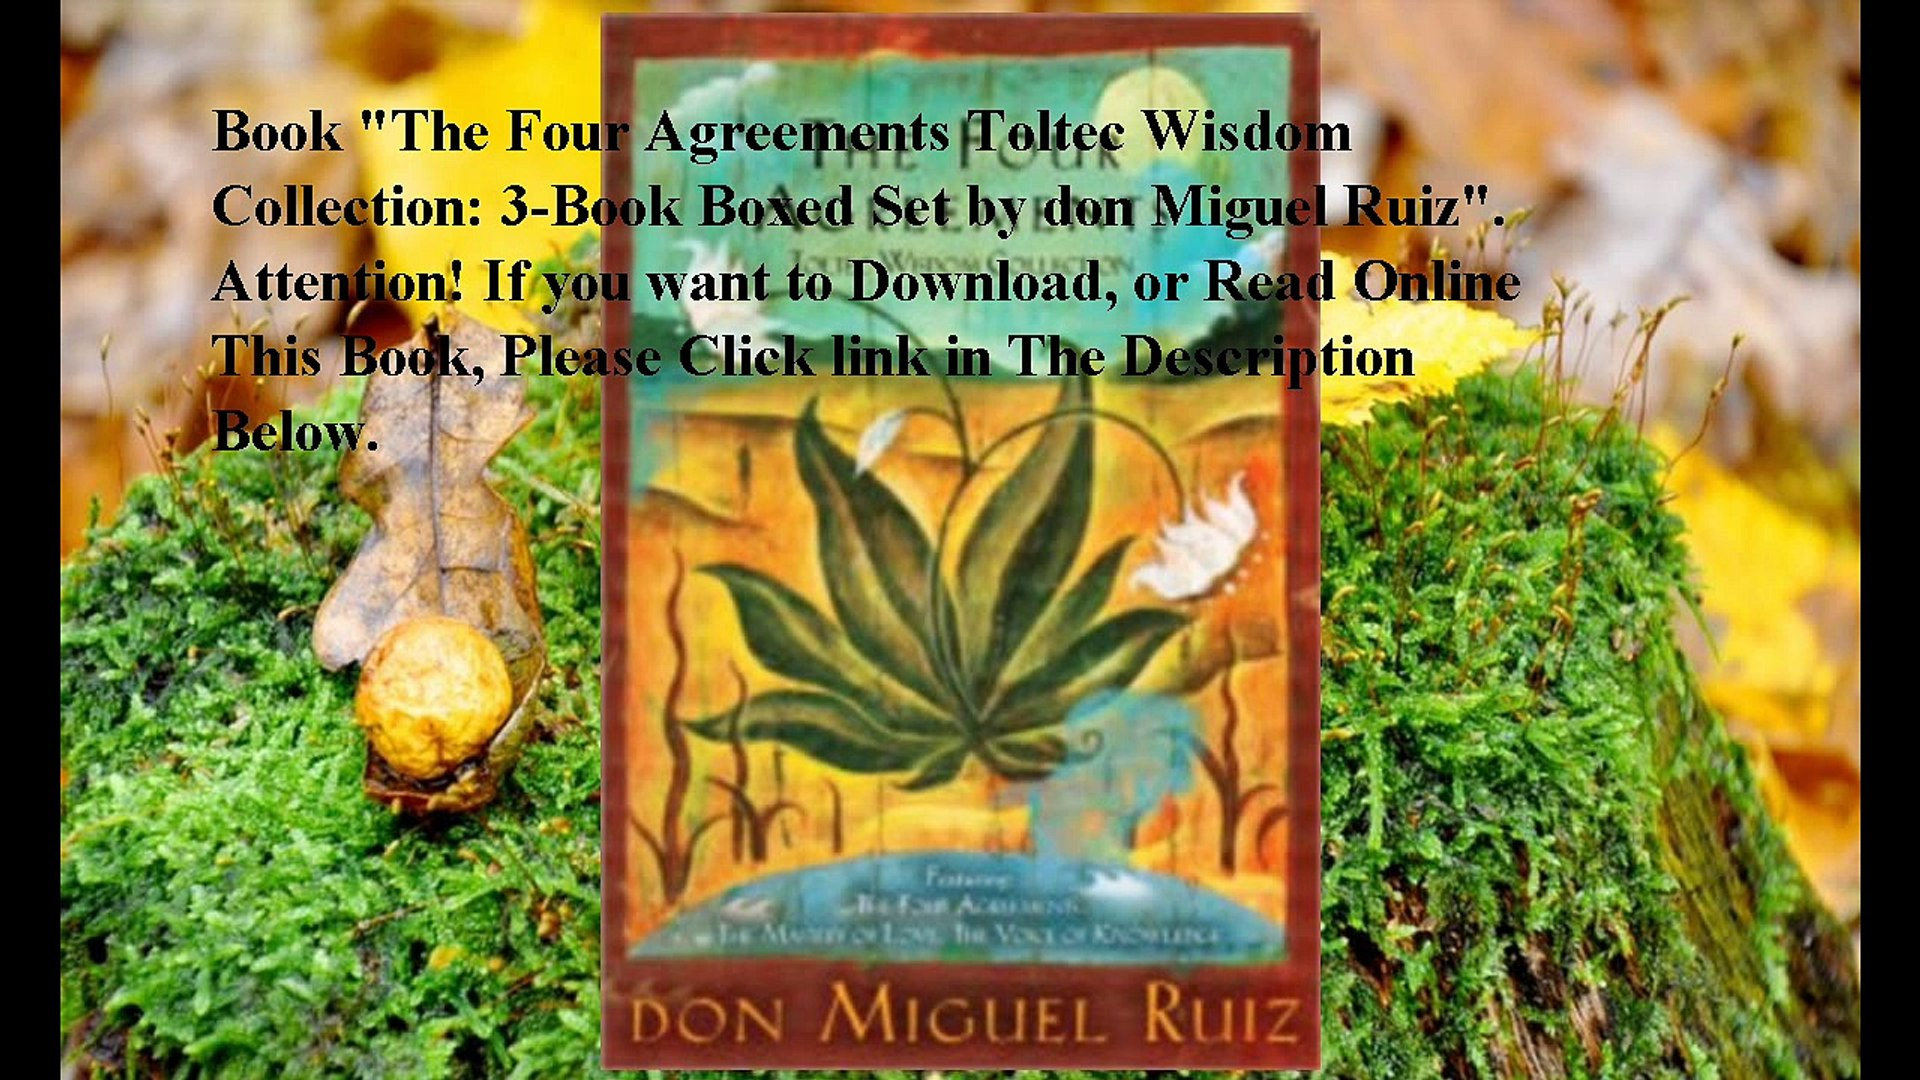 Four Agreements Book Free Download Download The Four Agreements Toltec Wisdom Collection 3 Book Boxed Set Ebook Pdf